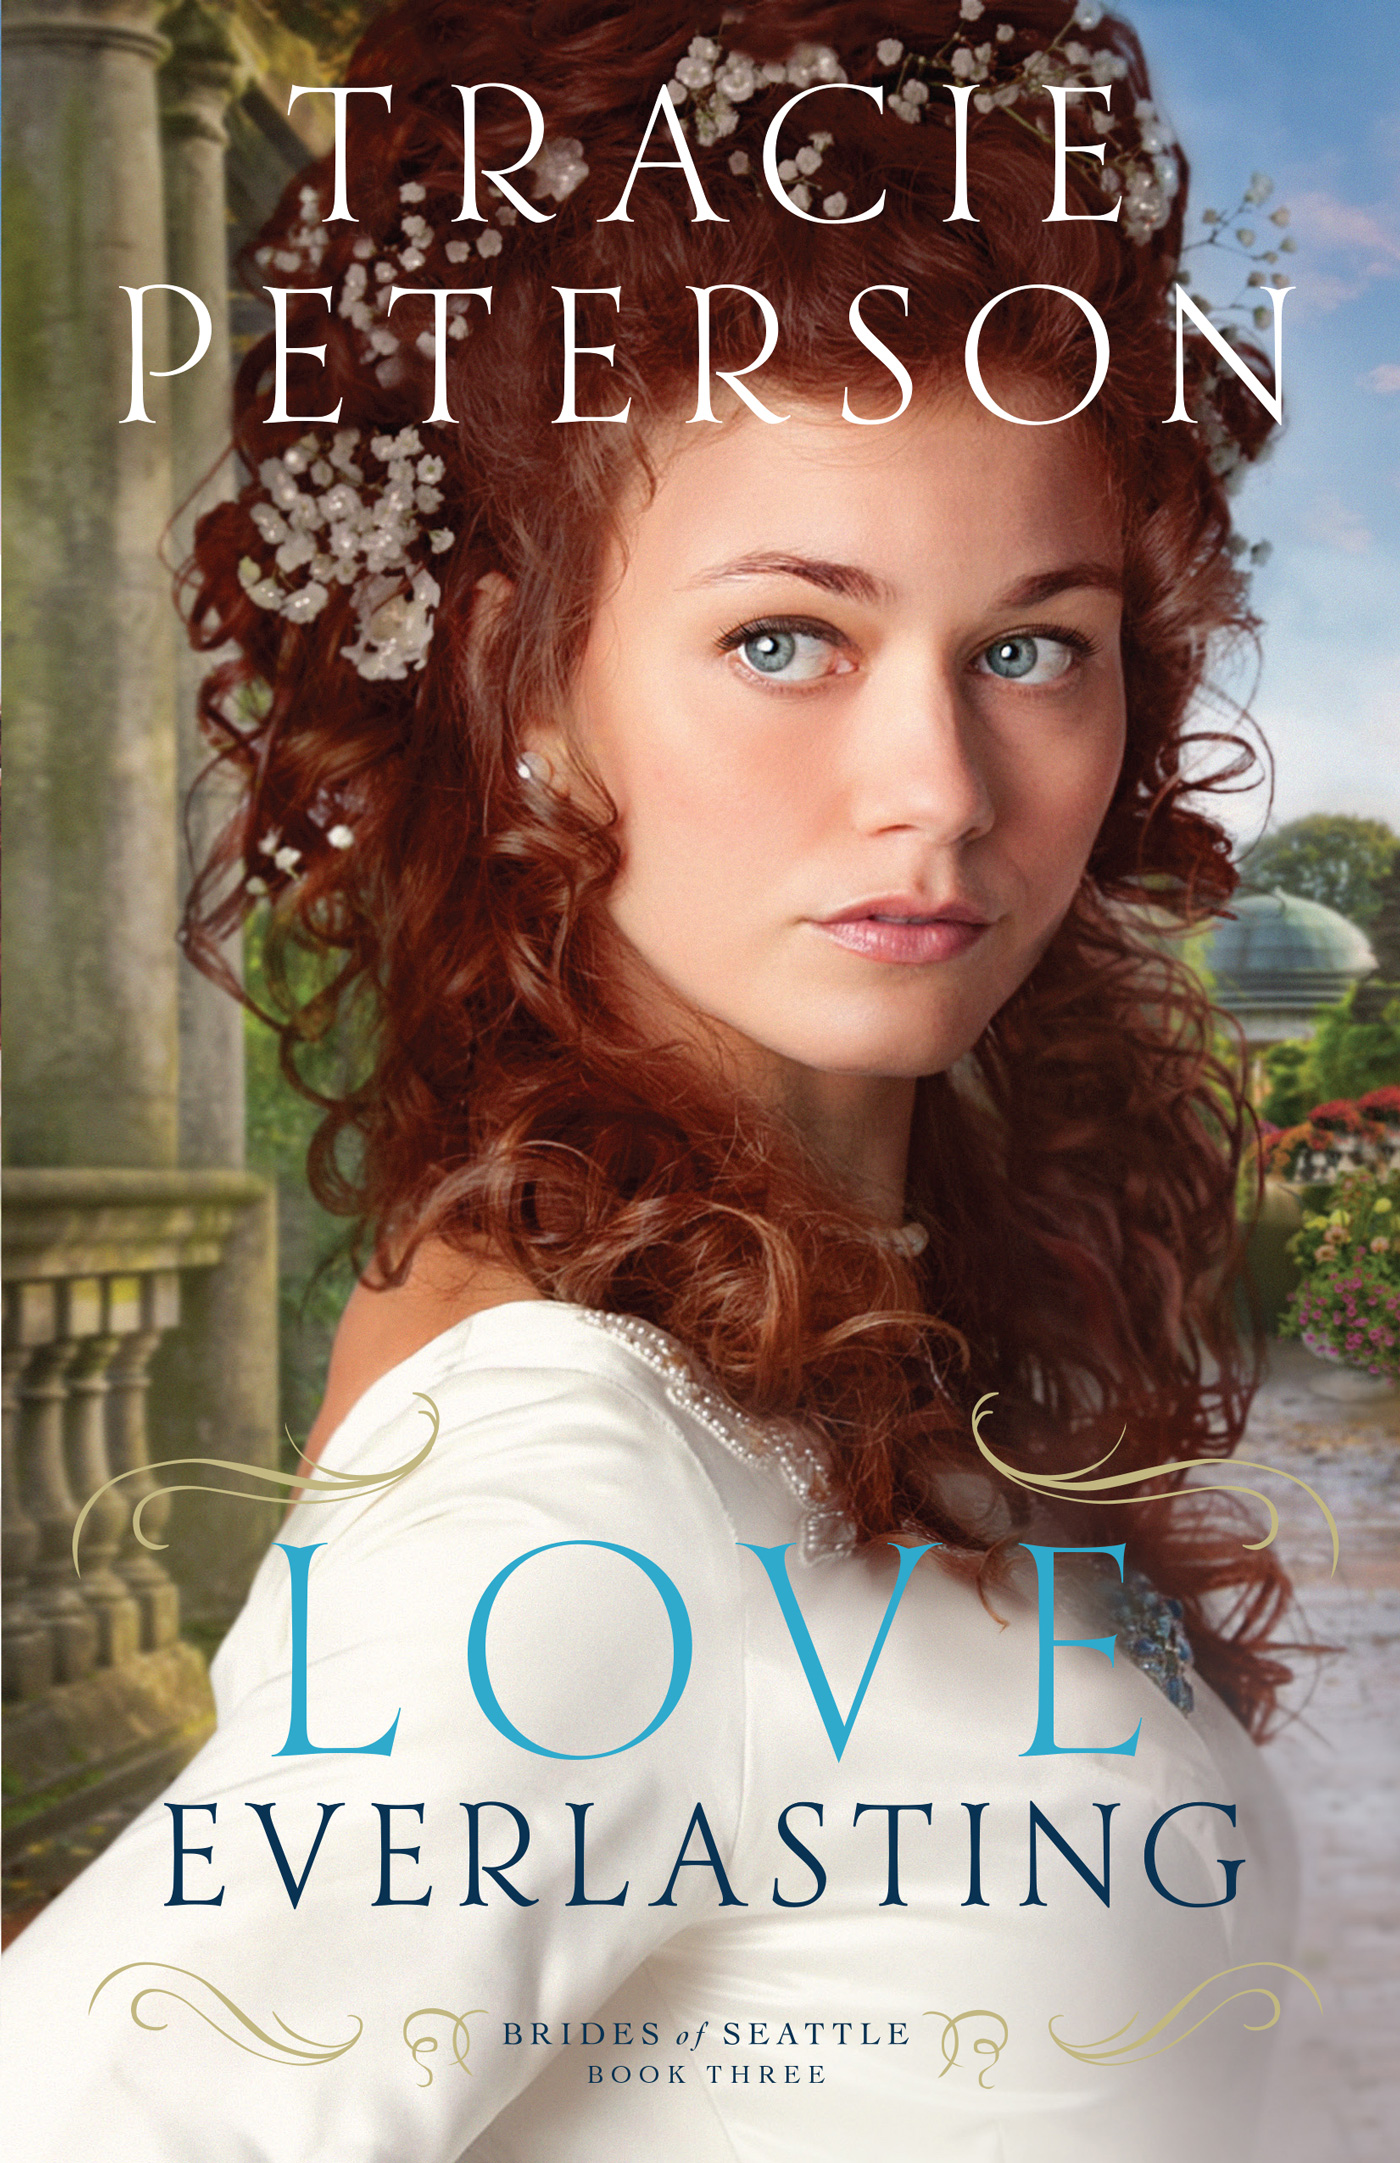 Love Everlasting (2015) by Tracie Peterson